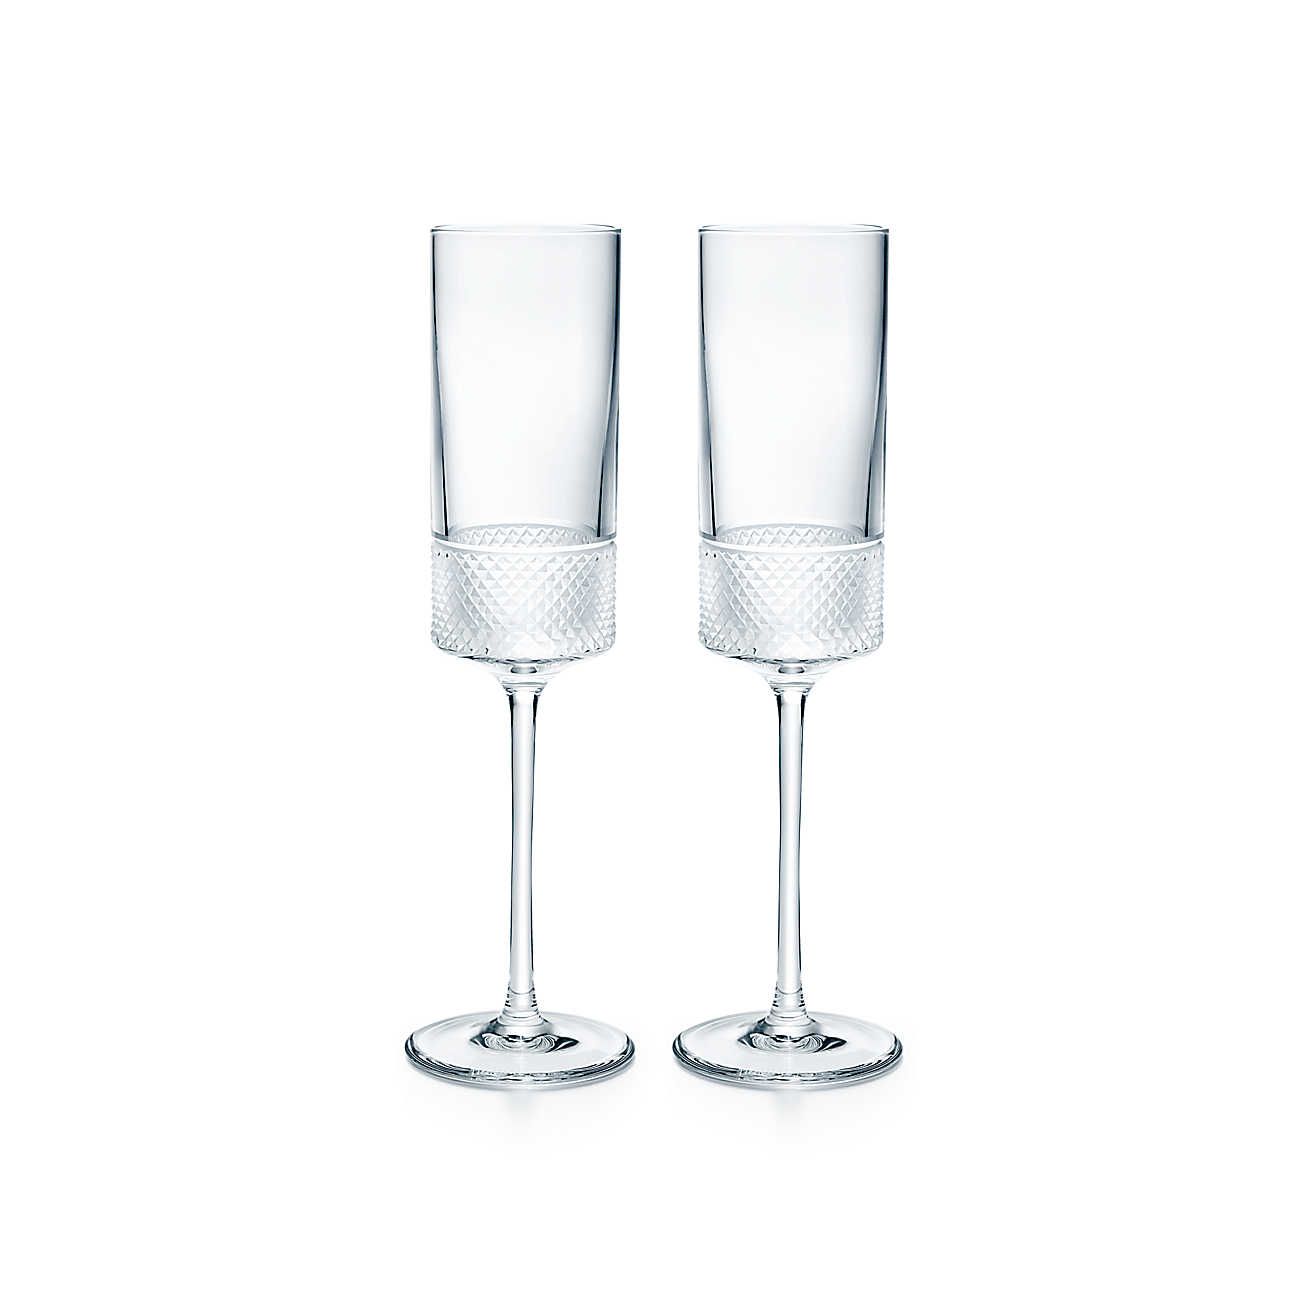 Diamond Point champagne flutes in crystal glass, set of two.